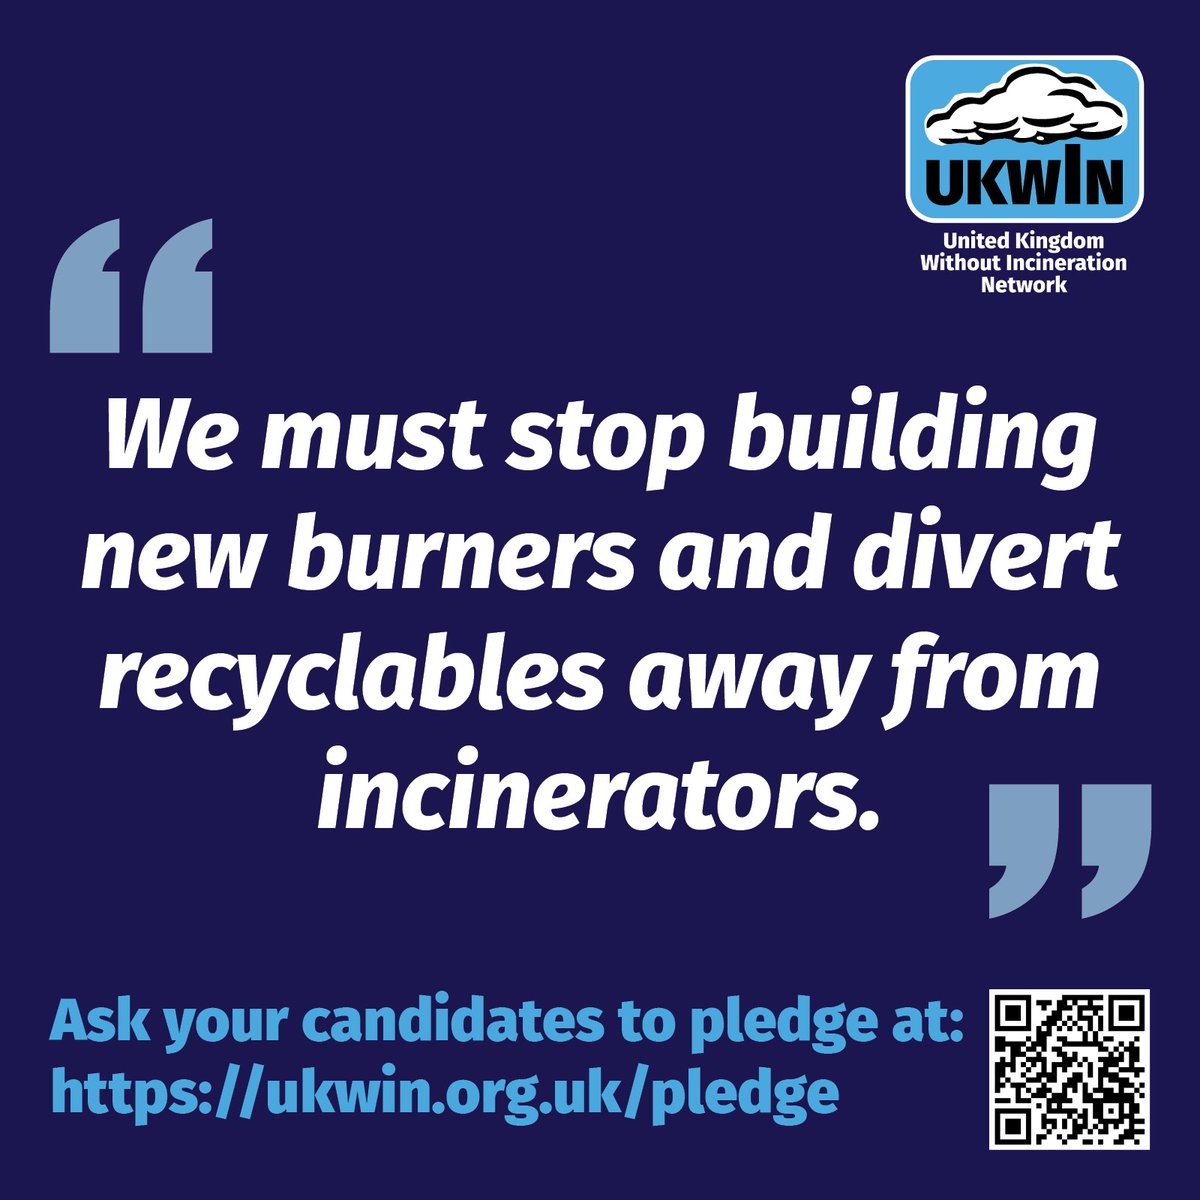 We want to see all candidates for the 2nd May local elections to pledge to oppose new incineration capacity and oppose council contracts that are incompatible with recycling and residual waste reduction. Candidates can sign and locals can share: ukwin.org.uk/pledge/